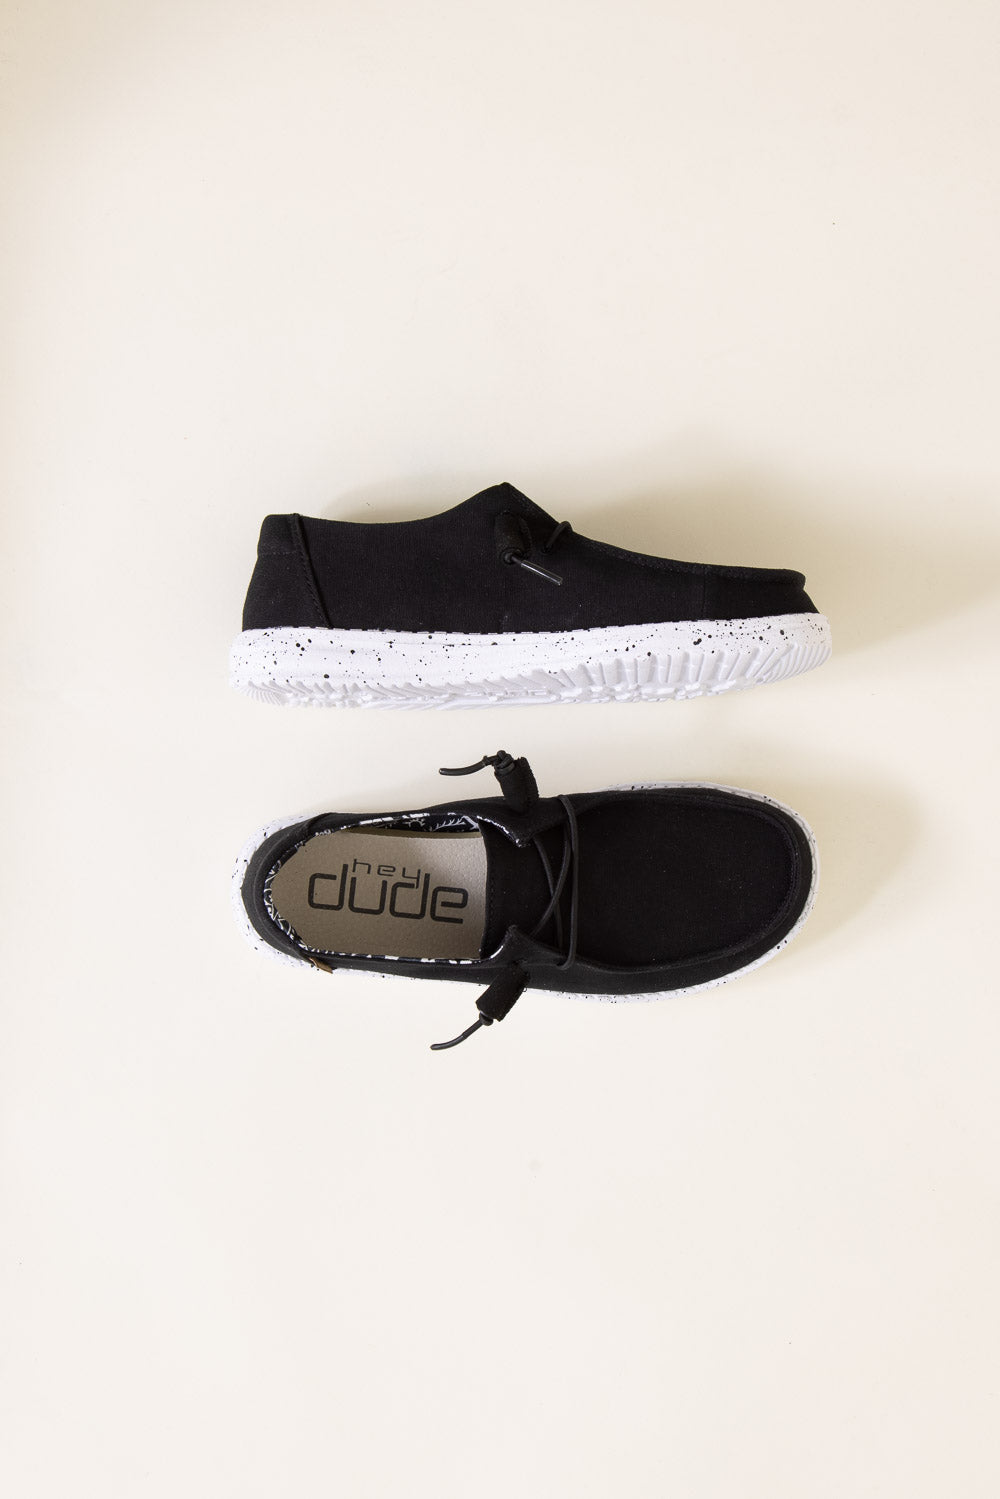 Size 7 Black HEYDUDE Shoes and Sandals, Online and In-Store